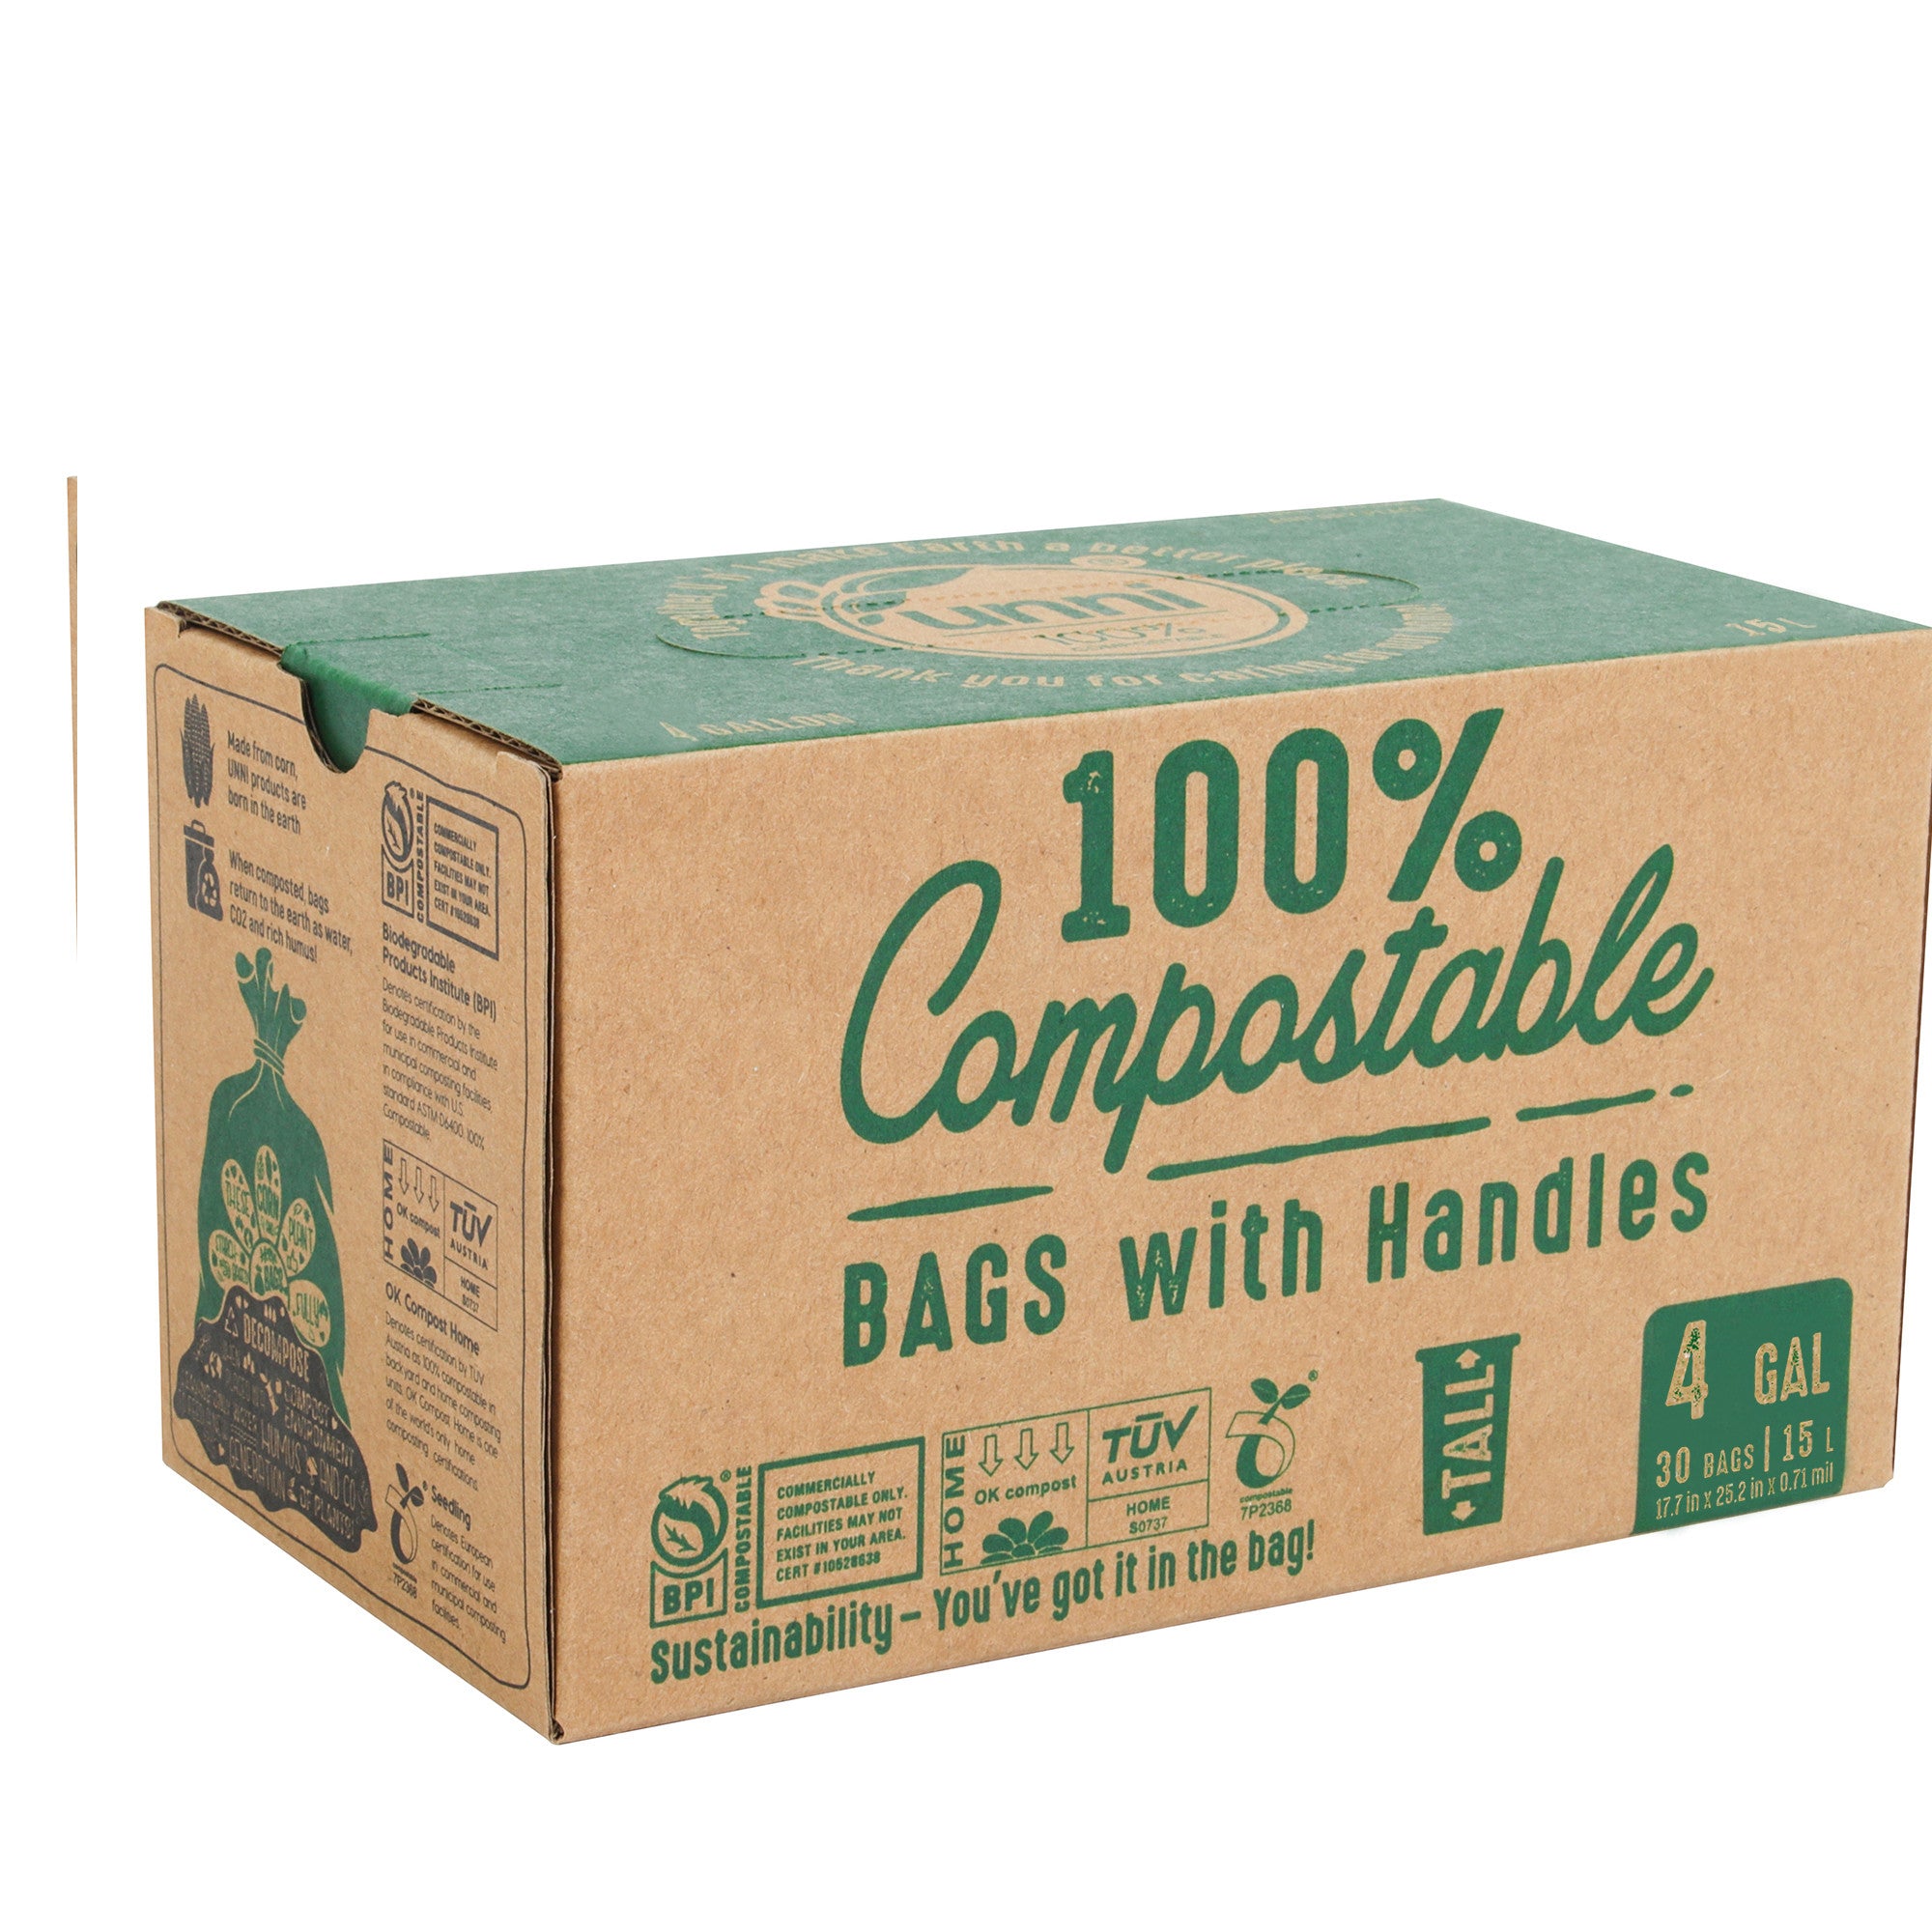 4 Gallon, 15 Liter, Compostable Bags with Handles